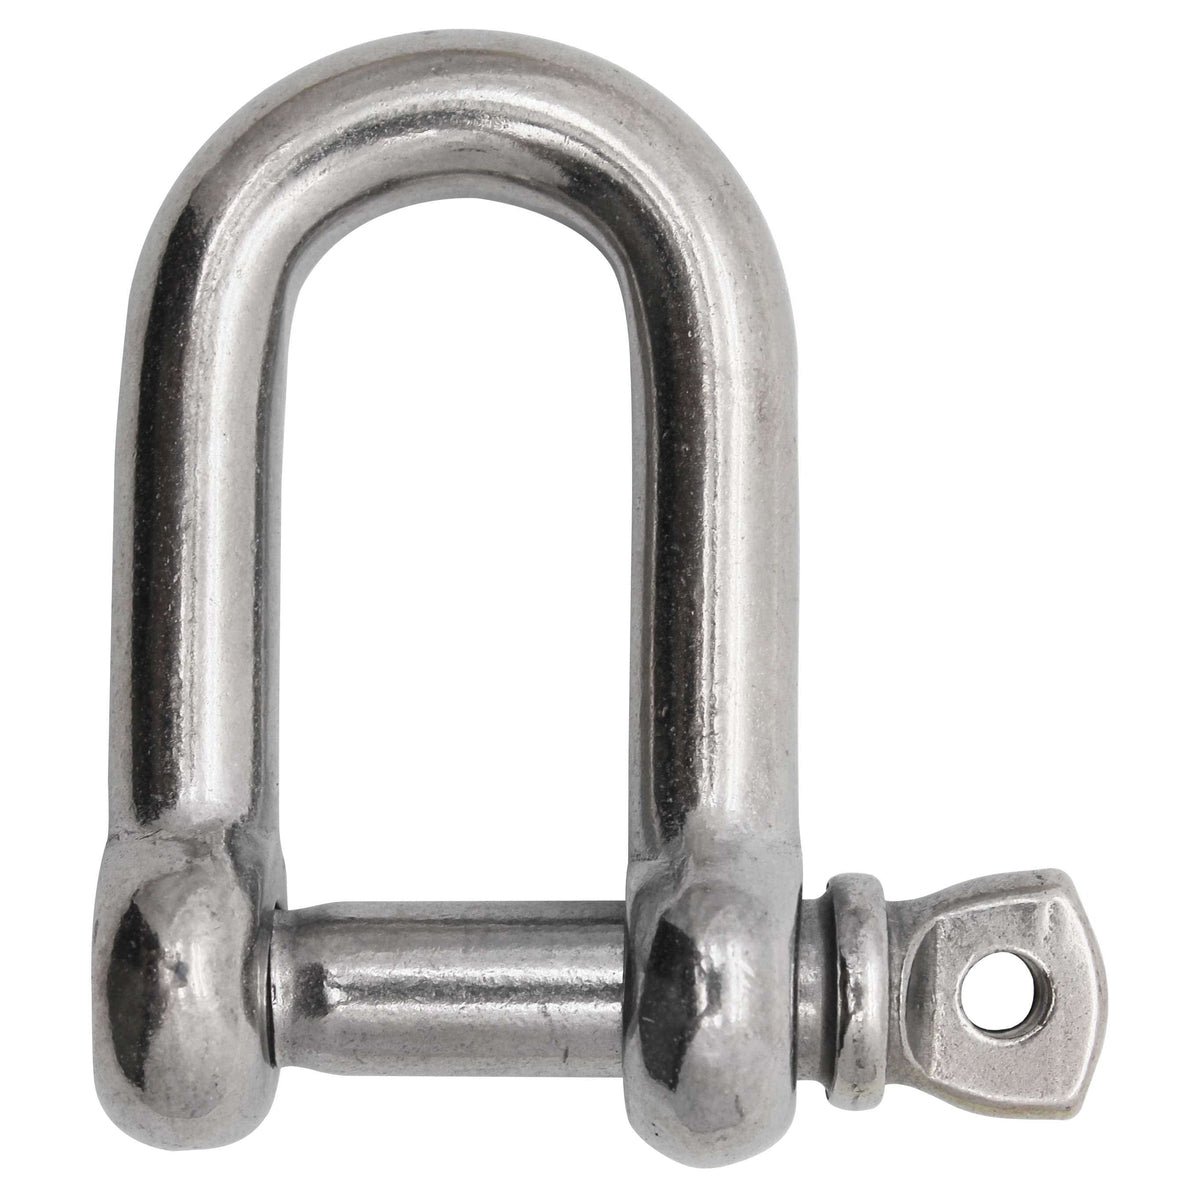 Extreme Max BoatTector SS D Shackle 7/8" #3006.8255